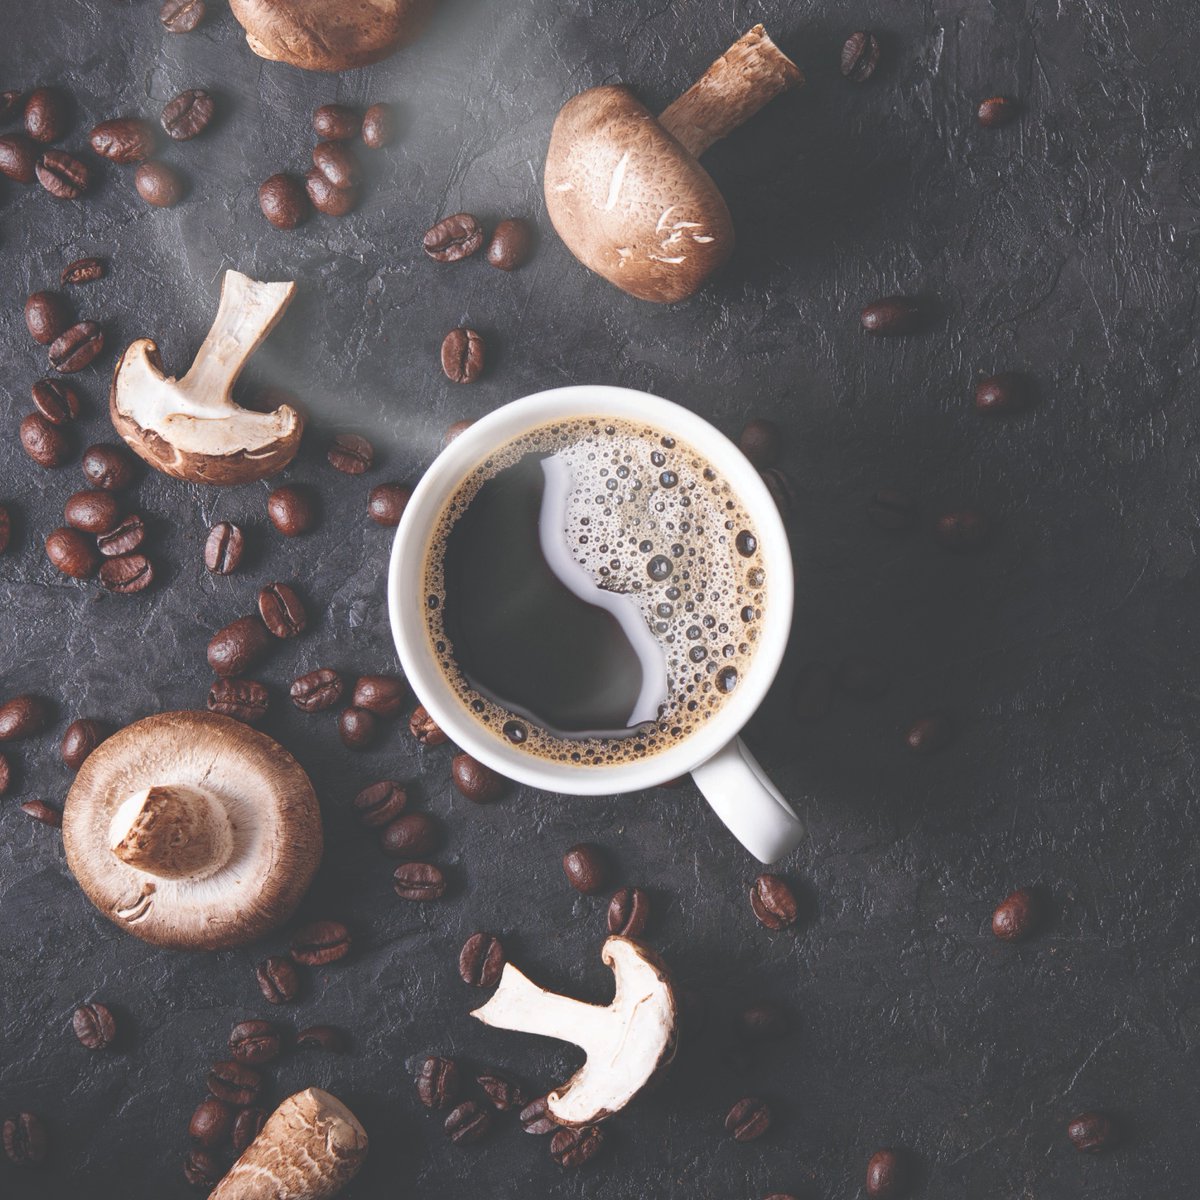 Mushroom coffee: trend or lifestyle? We want to hear from you! Share your experience in the comments! ☕🍄 

#driveresearch #u3coffee #unitedbycoffee #coffeelife